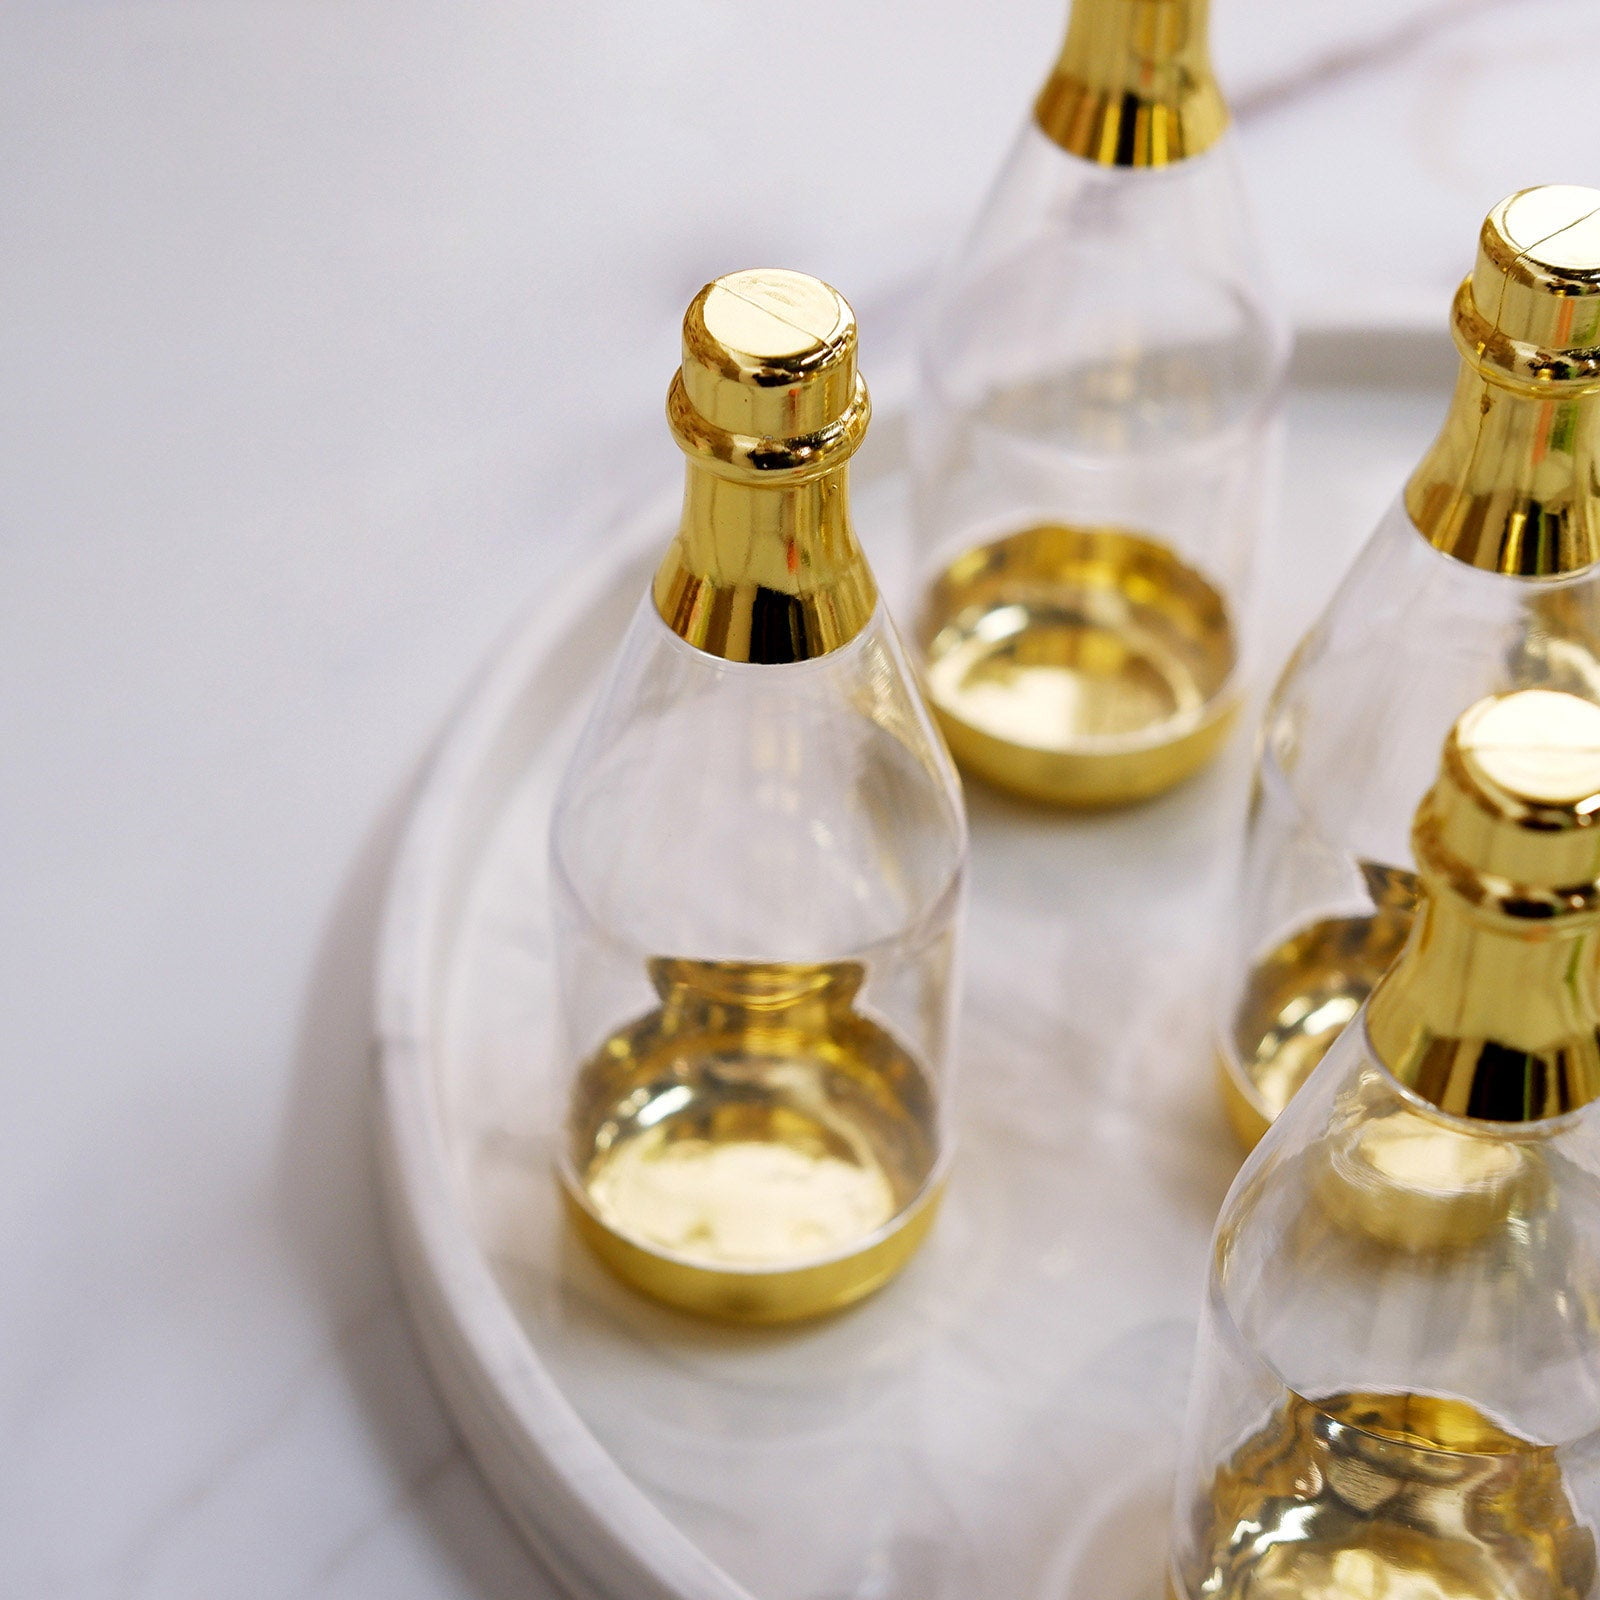 Small Clear Plastic Mini Champagne Bottle with Golden Top (Set of 3)